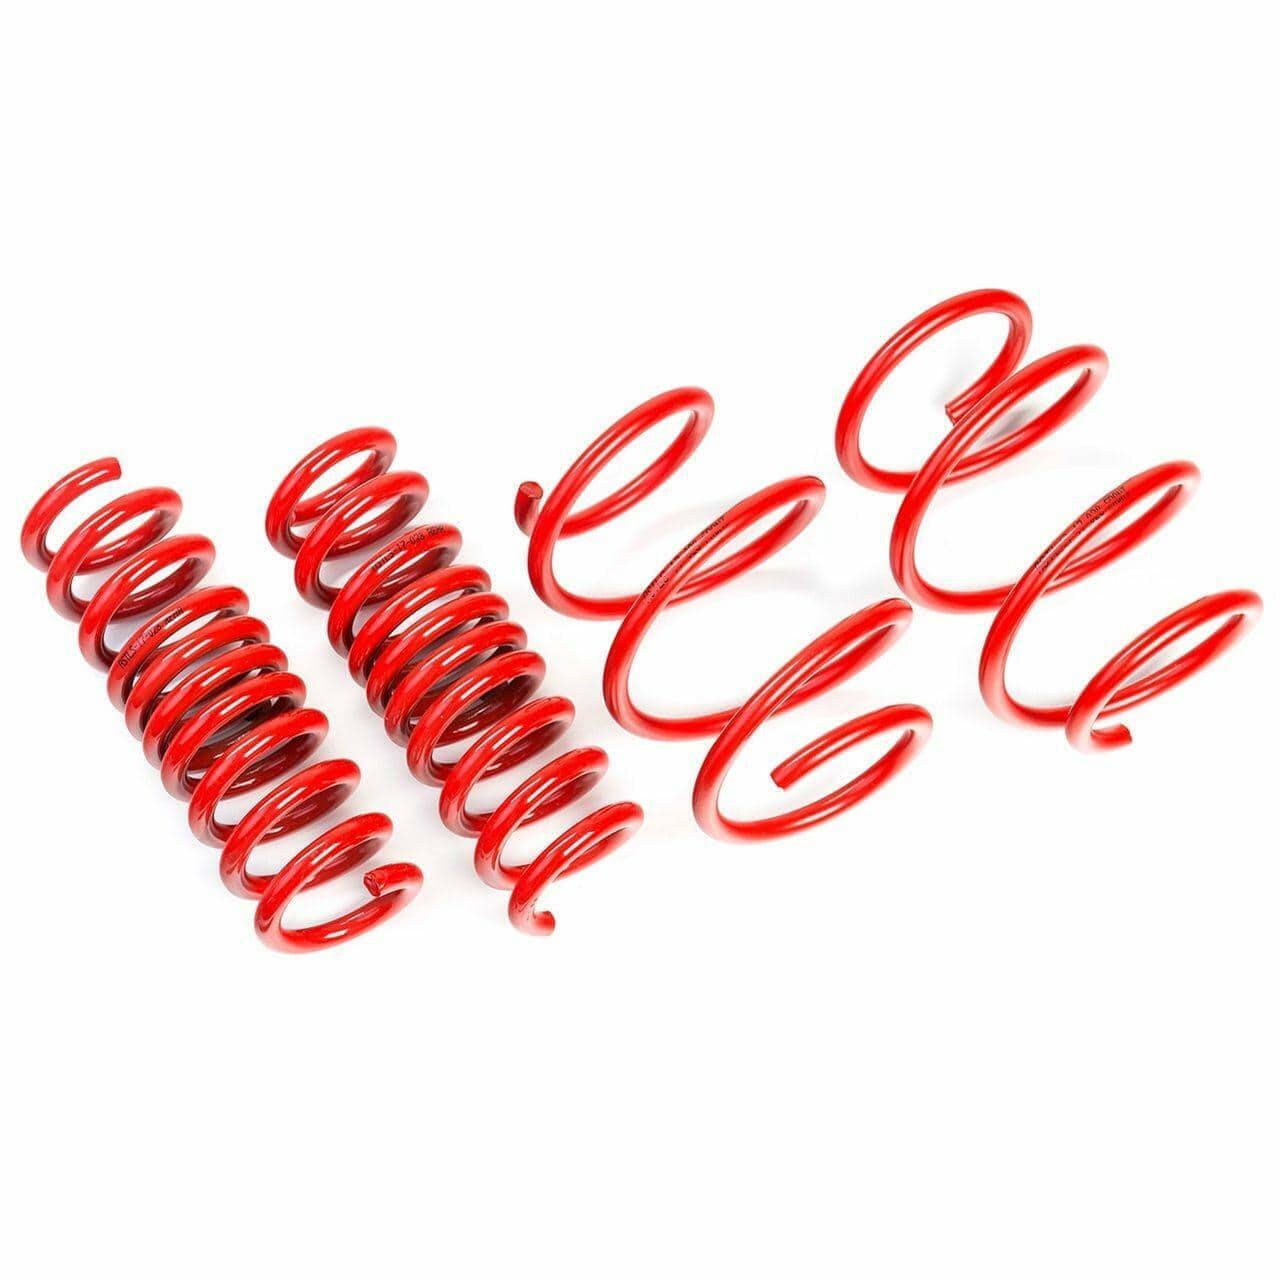 AST Suspension Lowering Springs (35MM/35MM) - 1986-1996 Audi 80 Quattro Coupe 6CYL (89) ASTLS-14-262